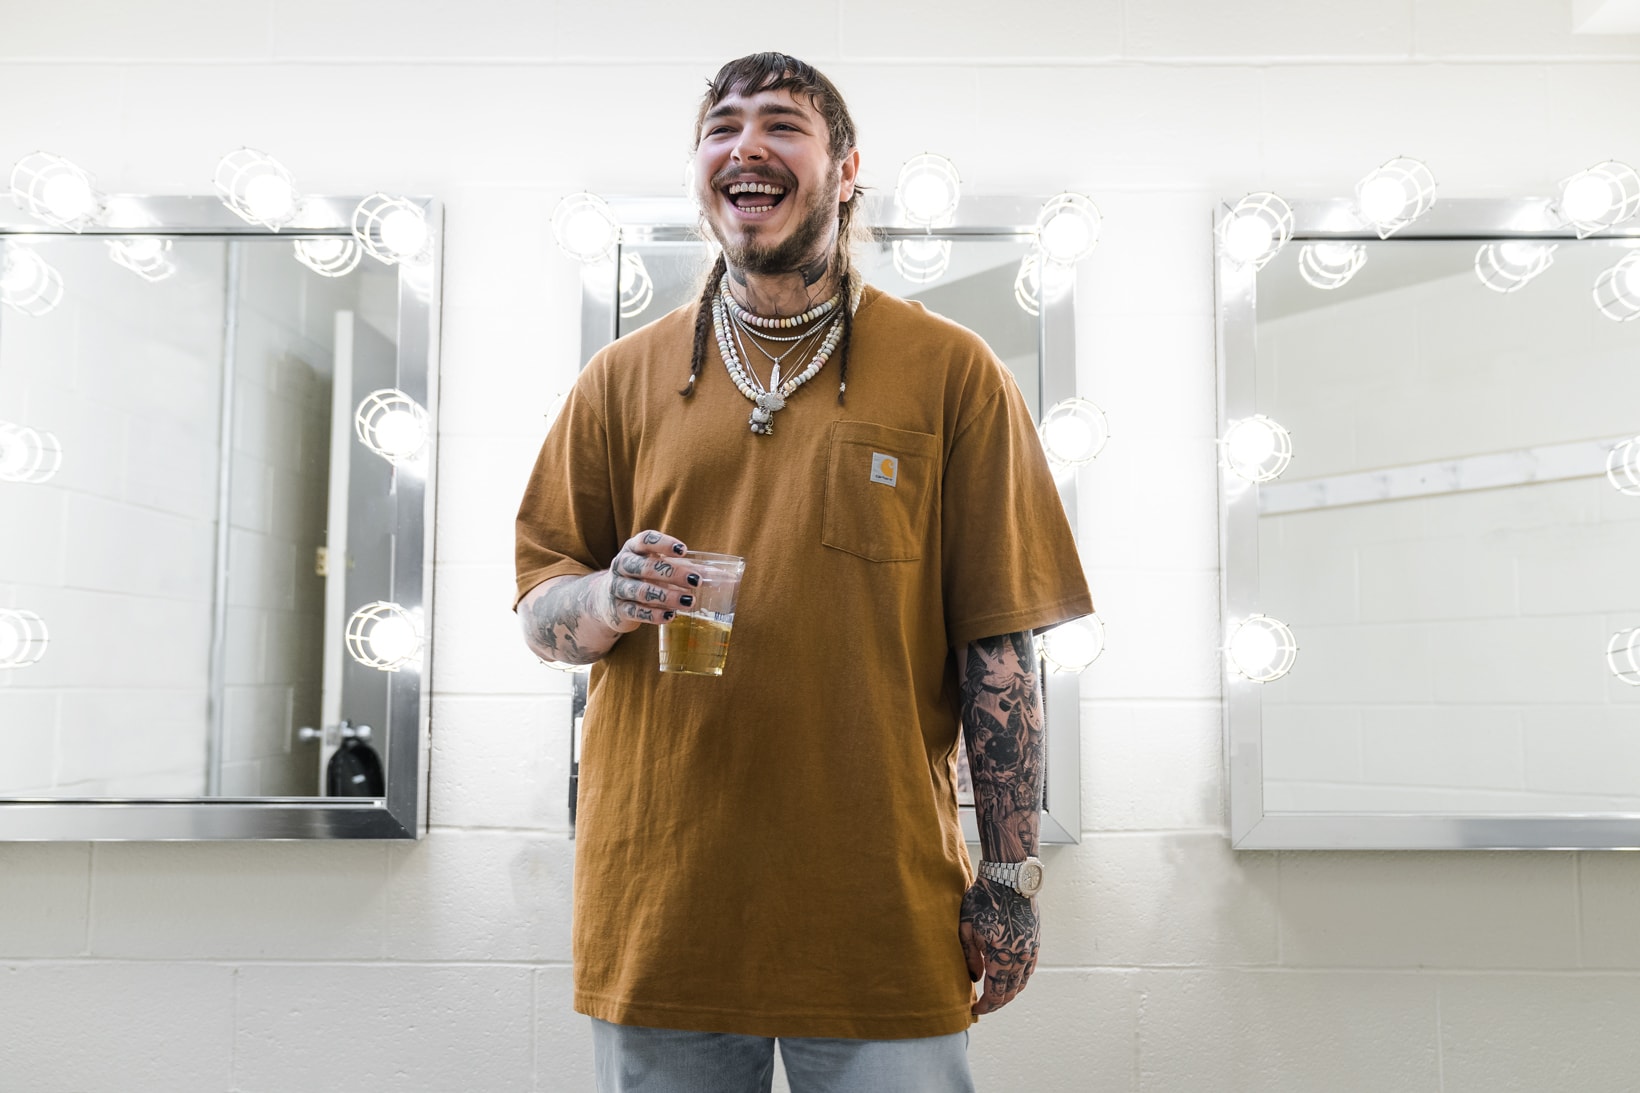 Post Malone Haircut WWE Aspirations Trance Acid Polka Album Stoney Congratulations White Iverson Deja Vu backstage performance carhartt jewelry stage clothing style fashion outfit beer beerbongs bentleys